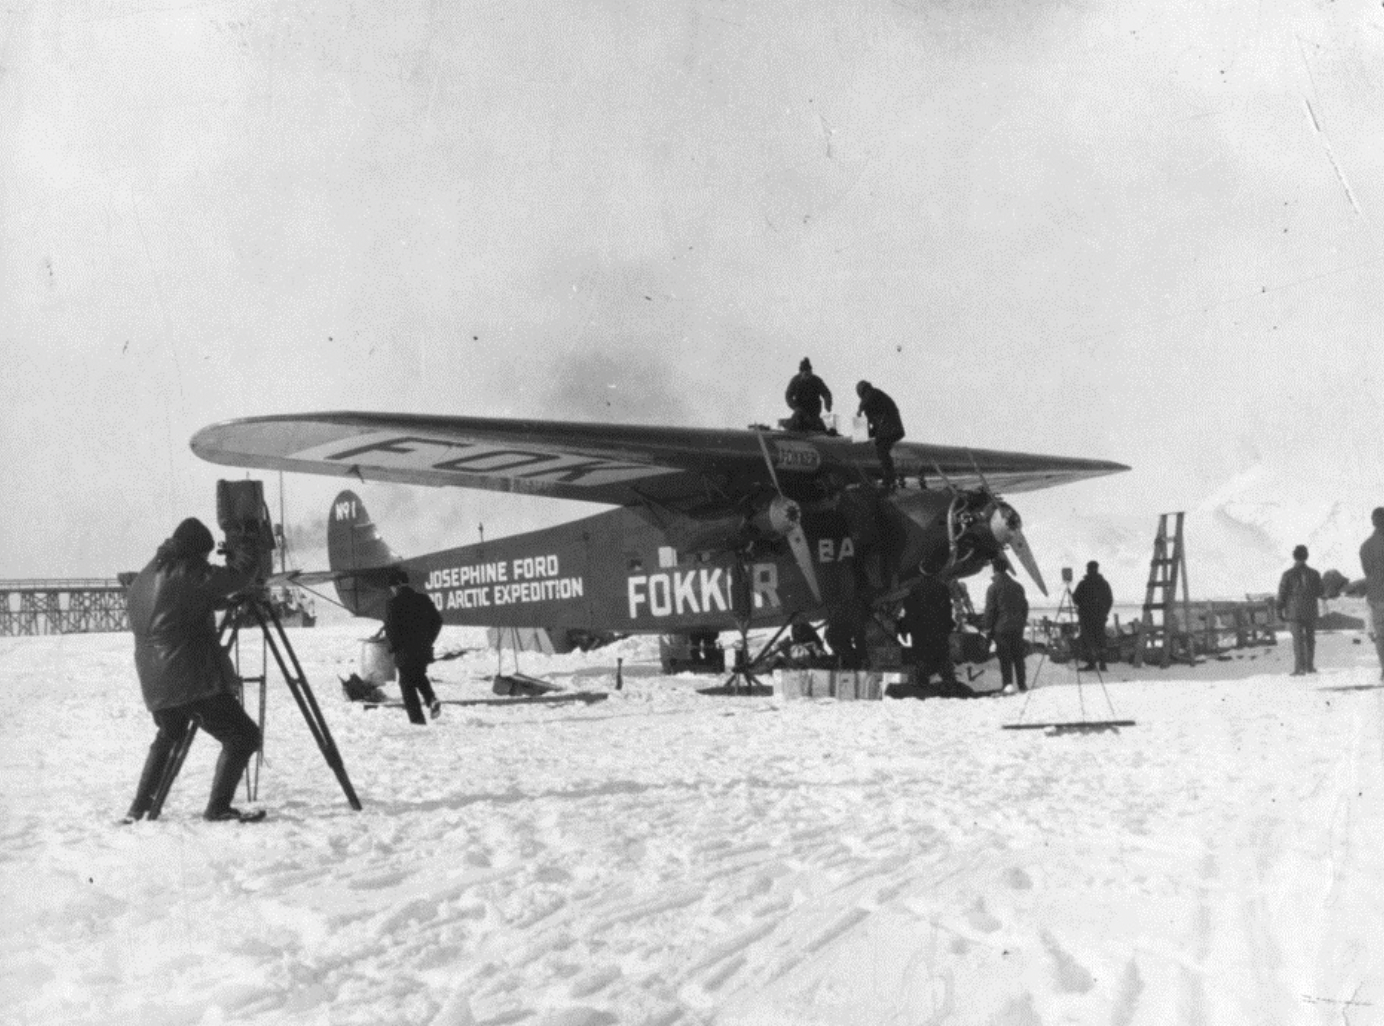 The Byrd Arctic Expedition, Spitzbergen, Svalbard 1927.